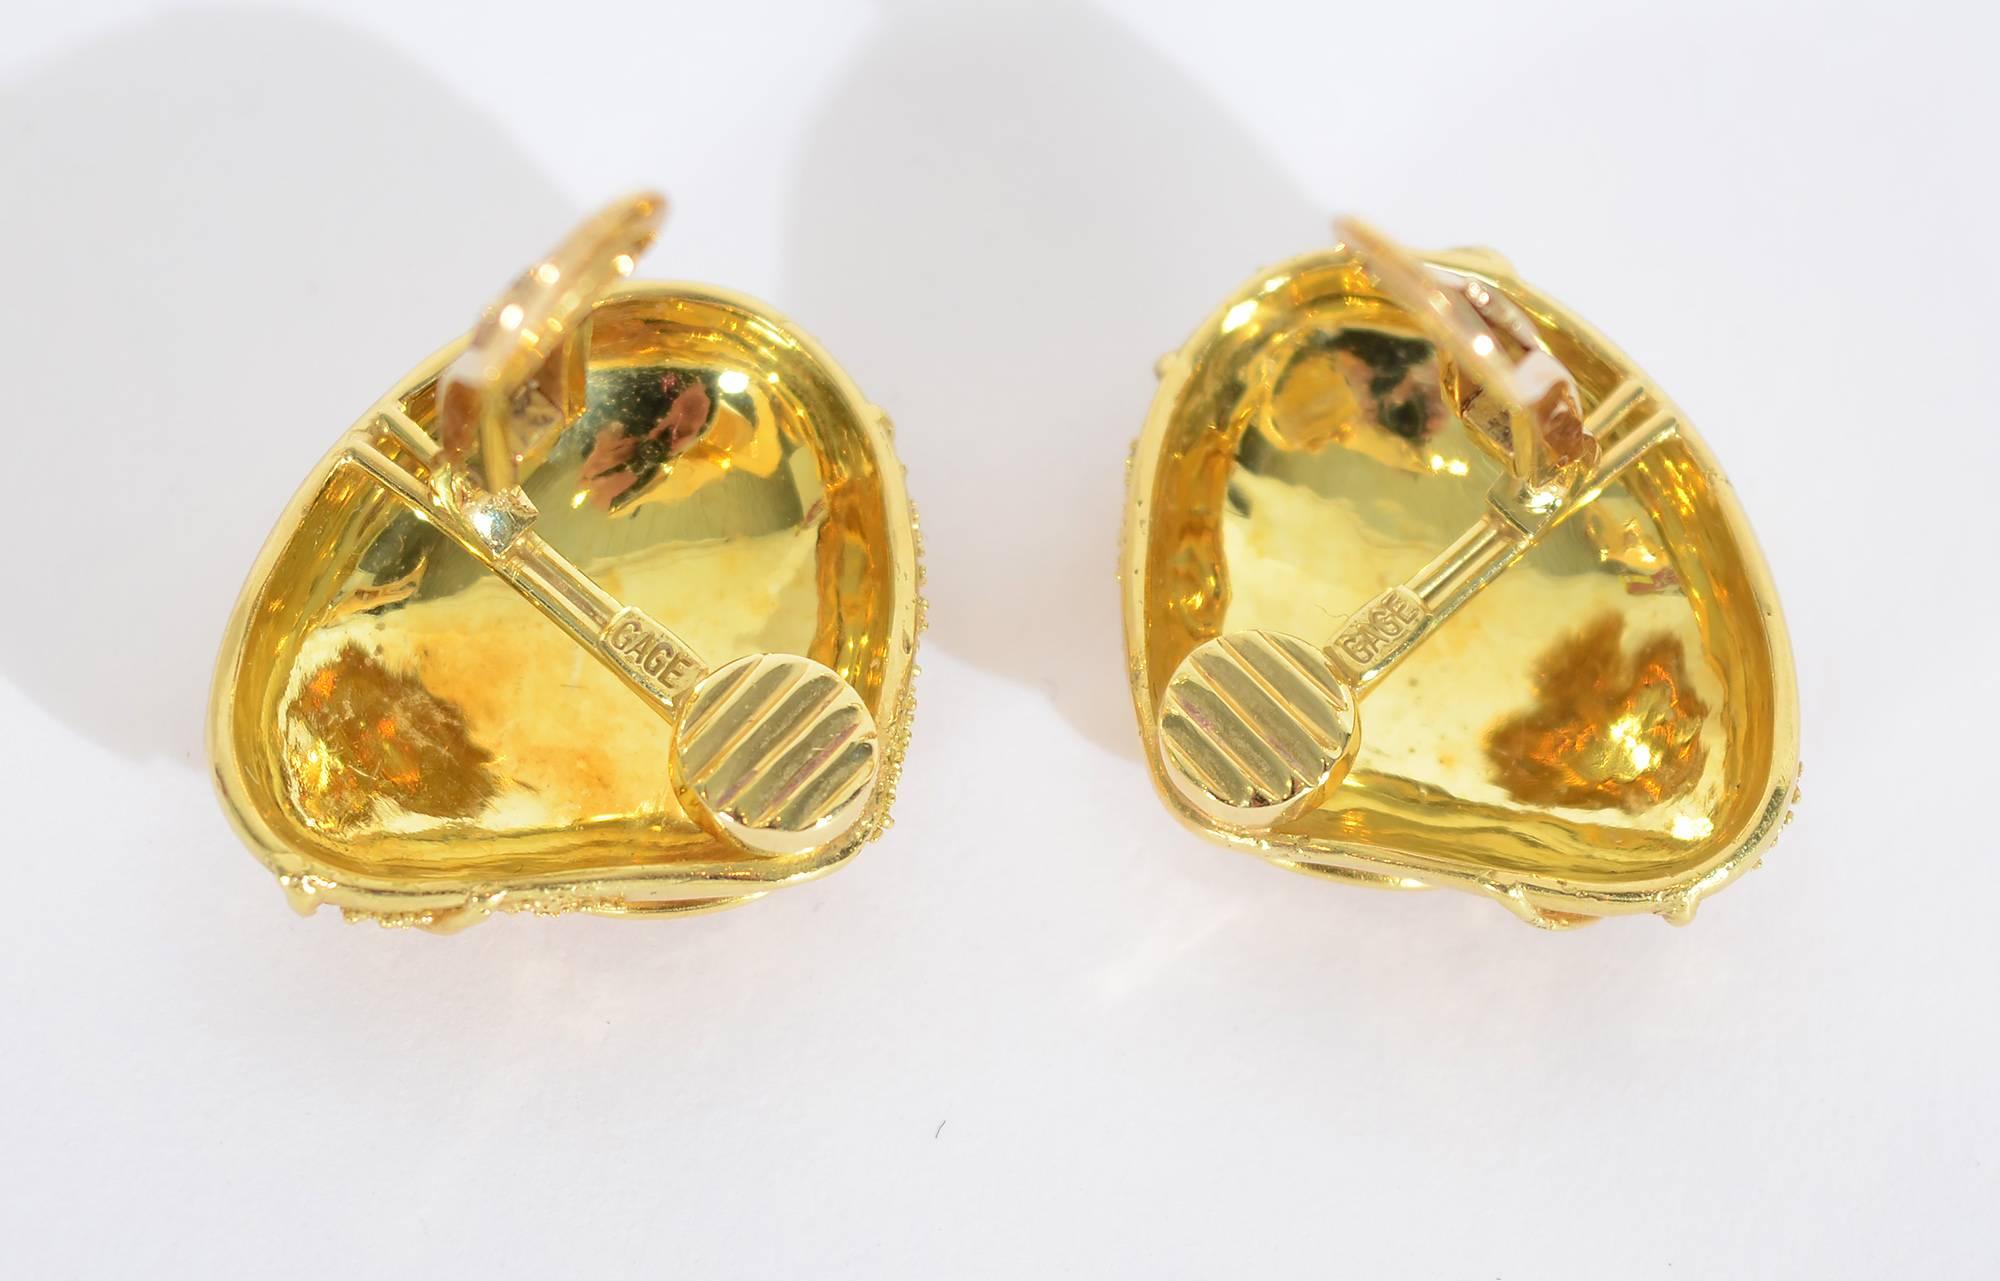 Bold 18 karat gold earrings by British jeweler, Elizabeth Gage in her granulation and wire  finish. Curvilinear designs in gold wire seem to anchor the minuscule gold beading. Backs are clips that can be converted to posts. Measurements are 1 inch